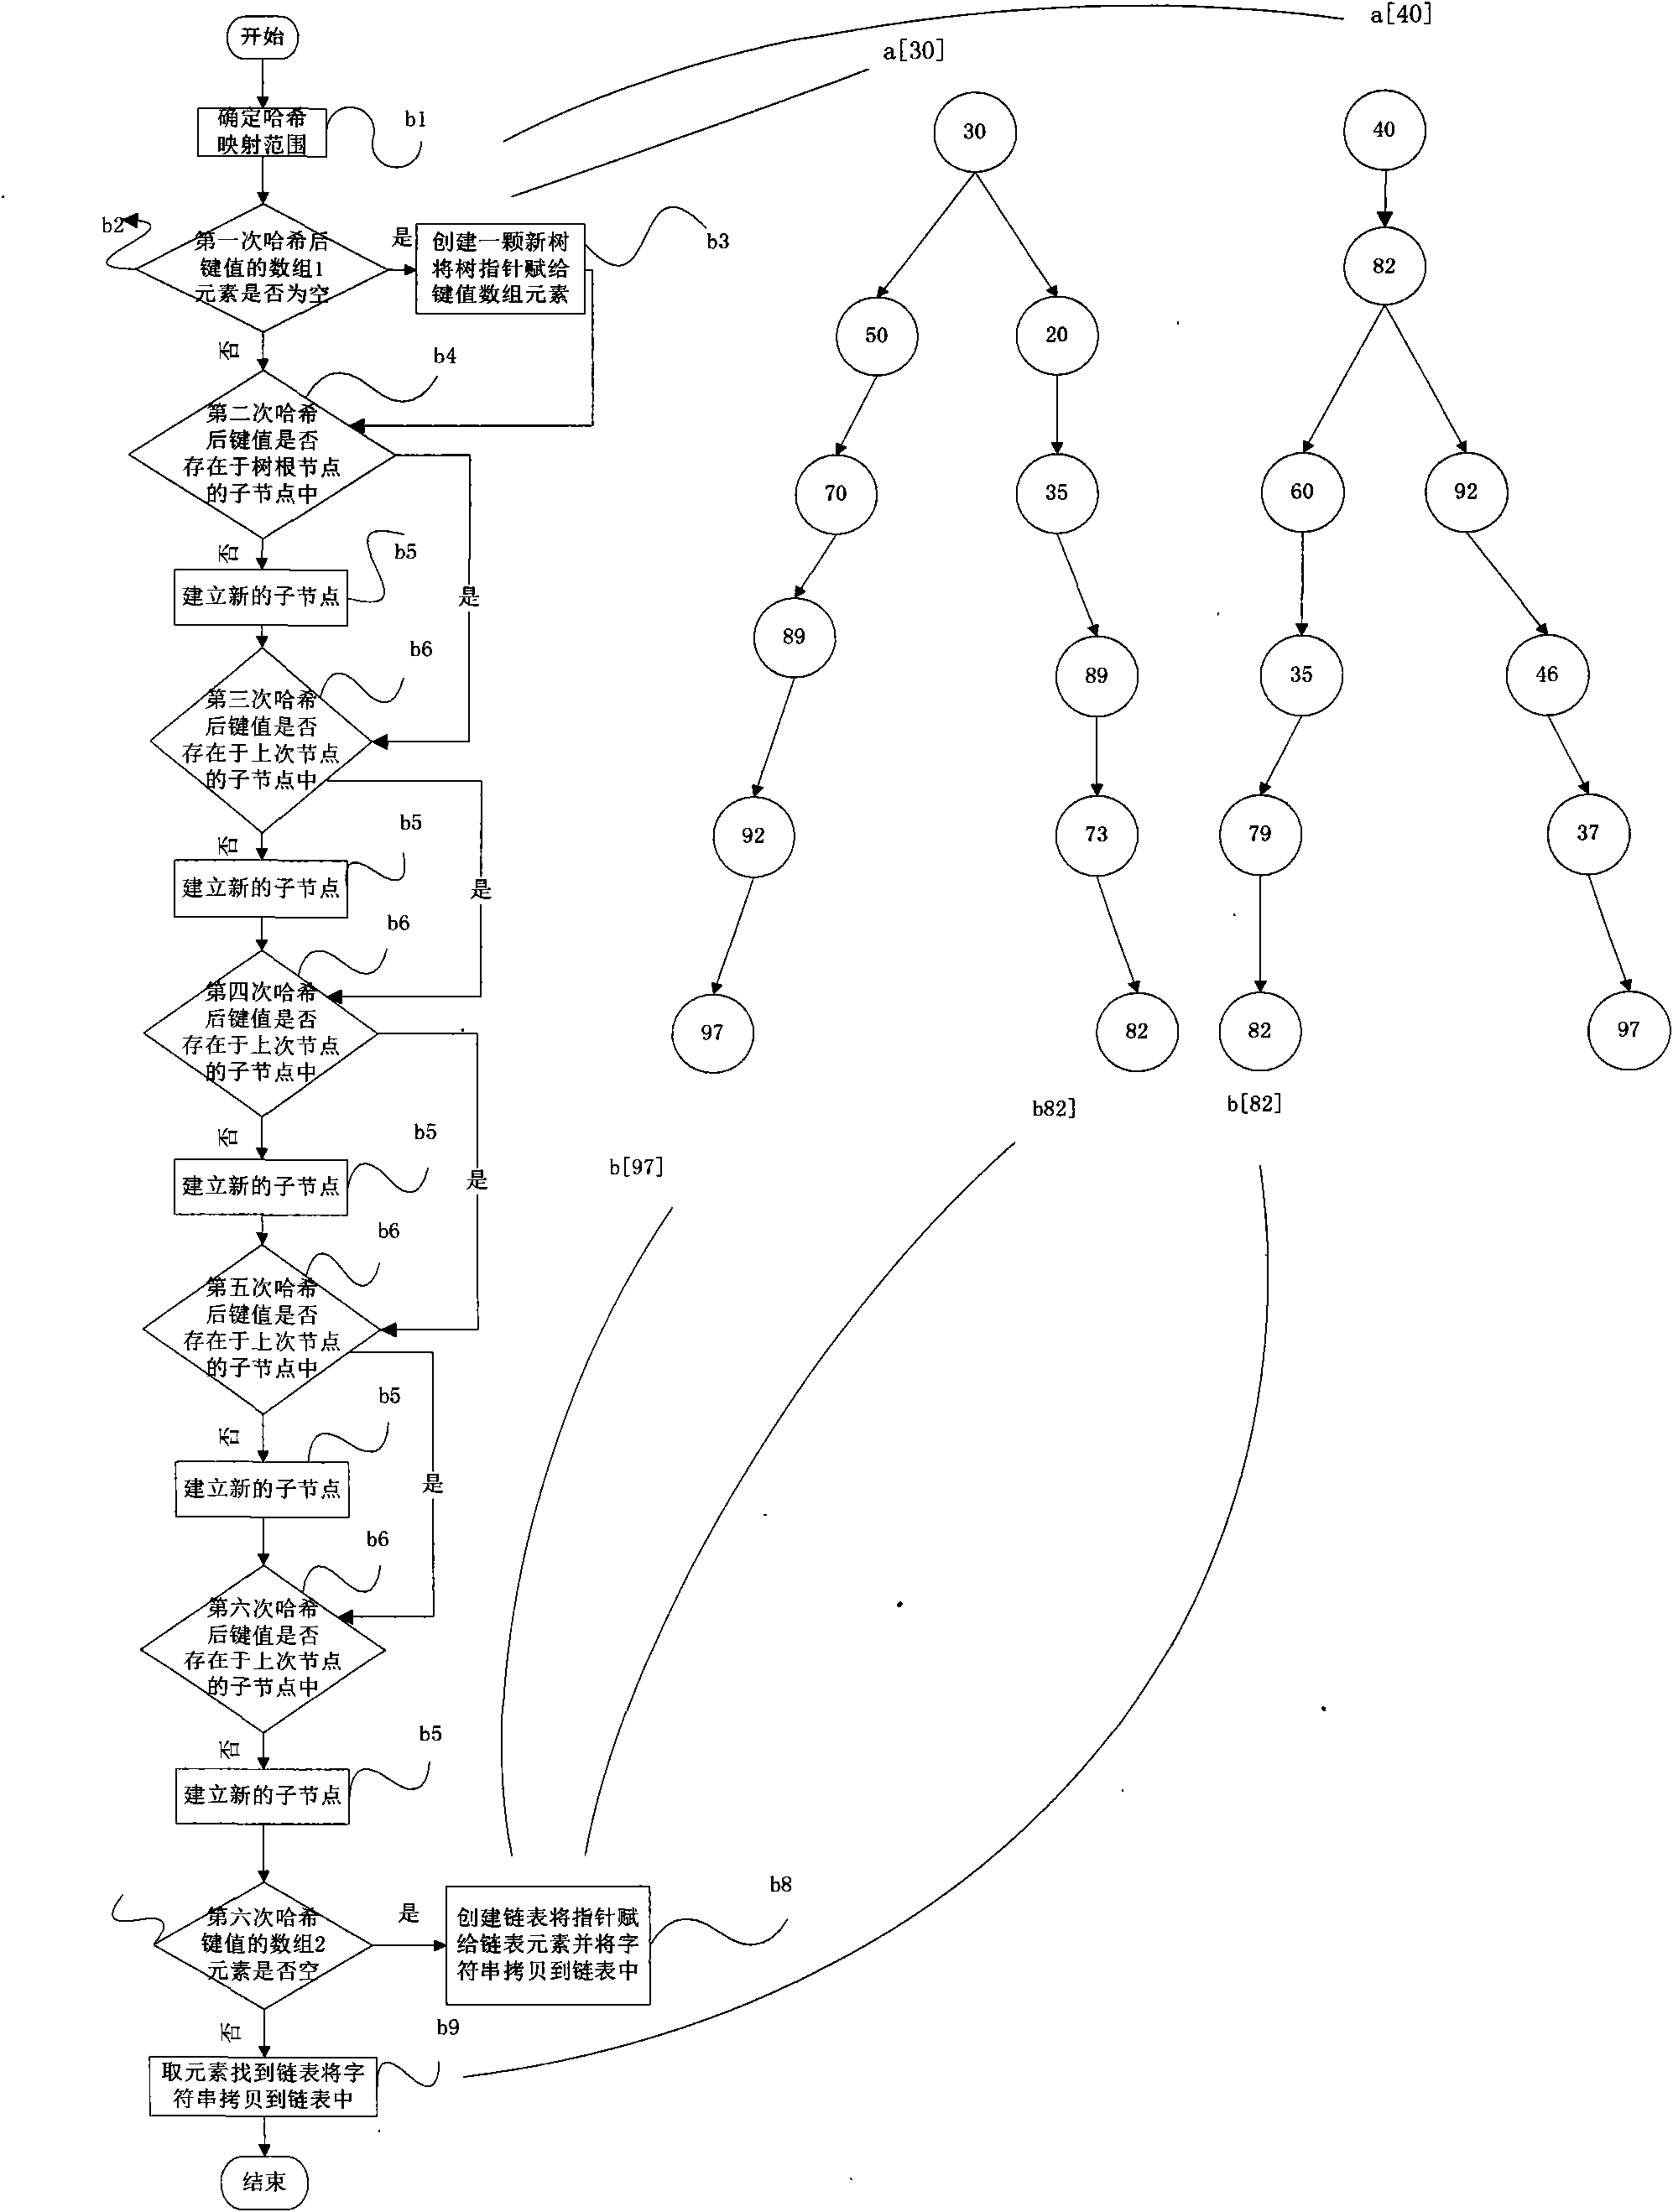 Method for filtering abnormal call based on multiple lists